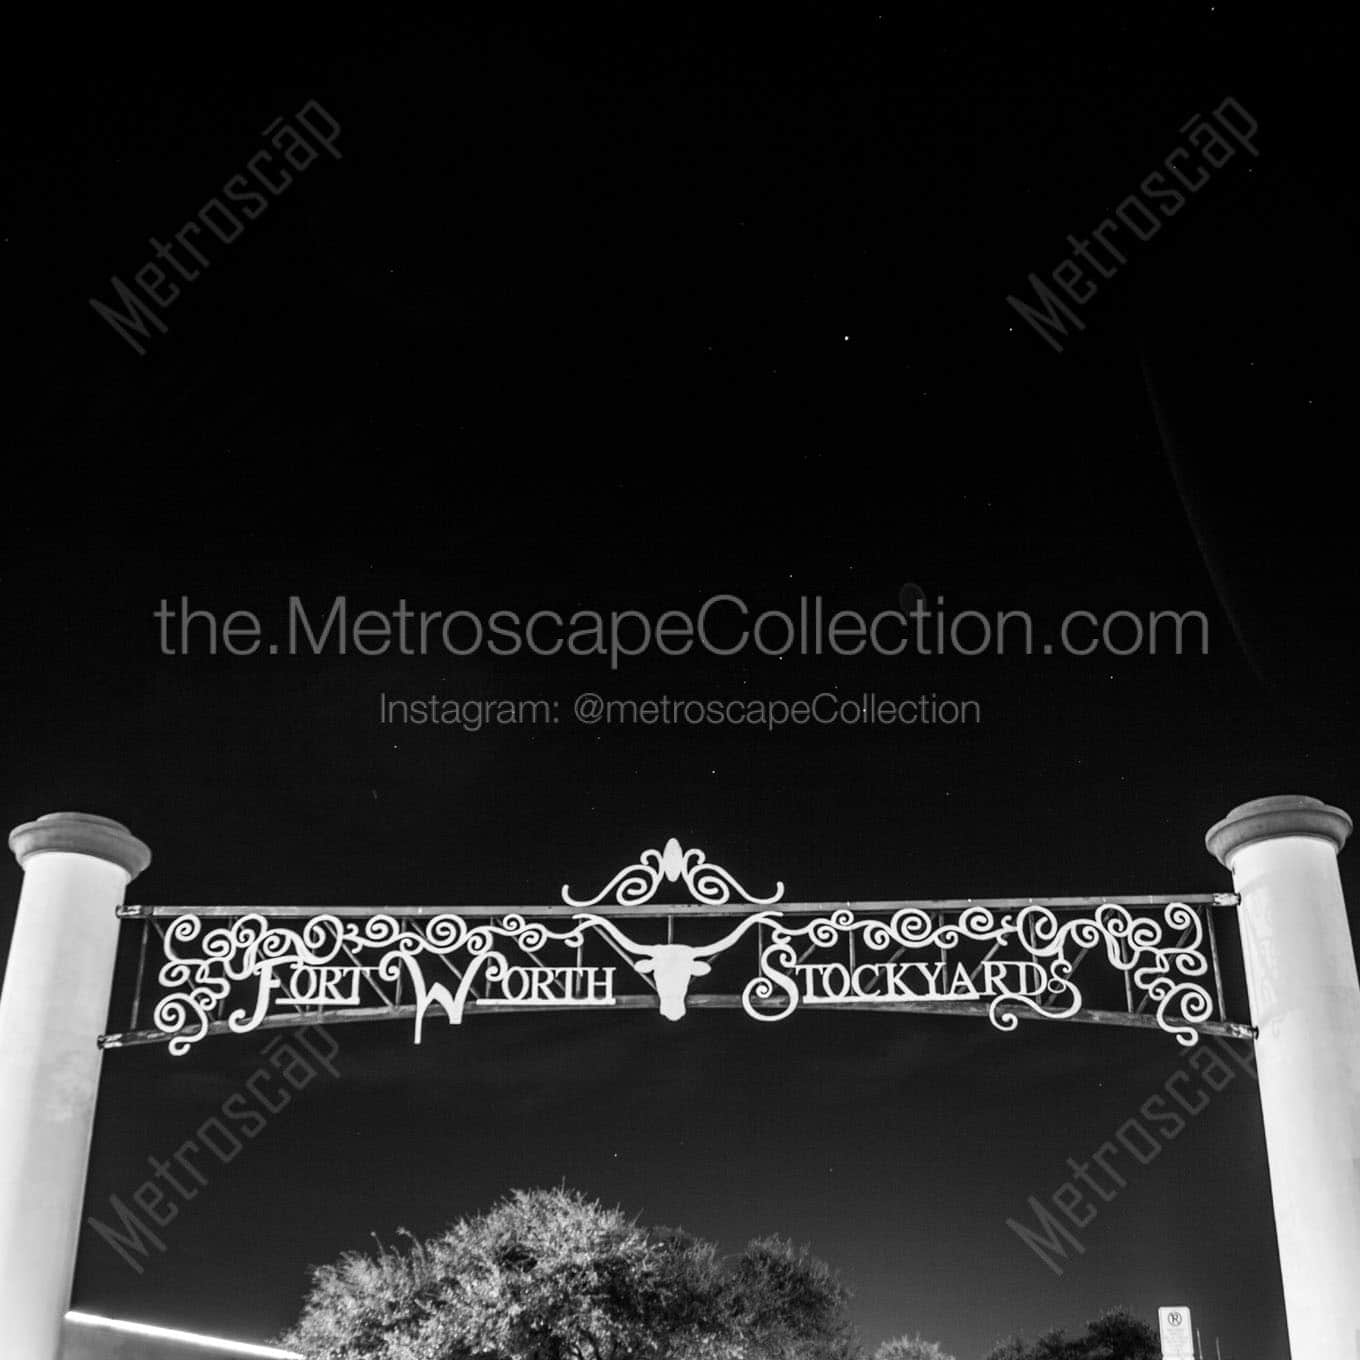 fort worth stockyards entrance rodeo plaza Black & White Wall Art